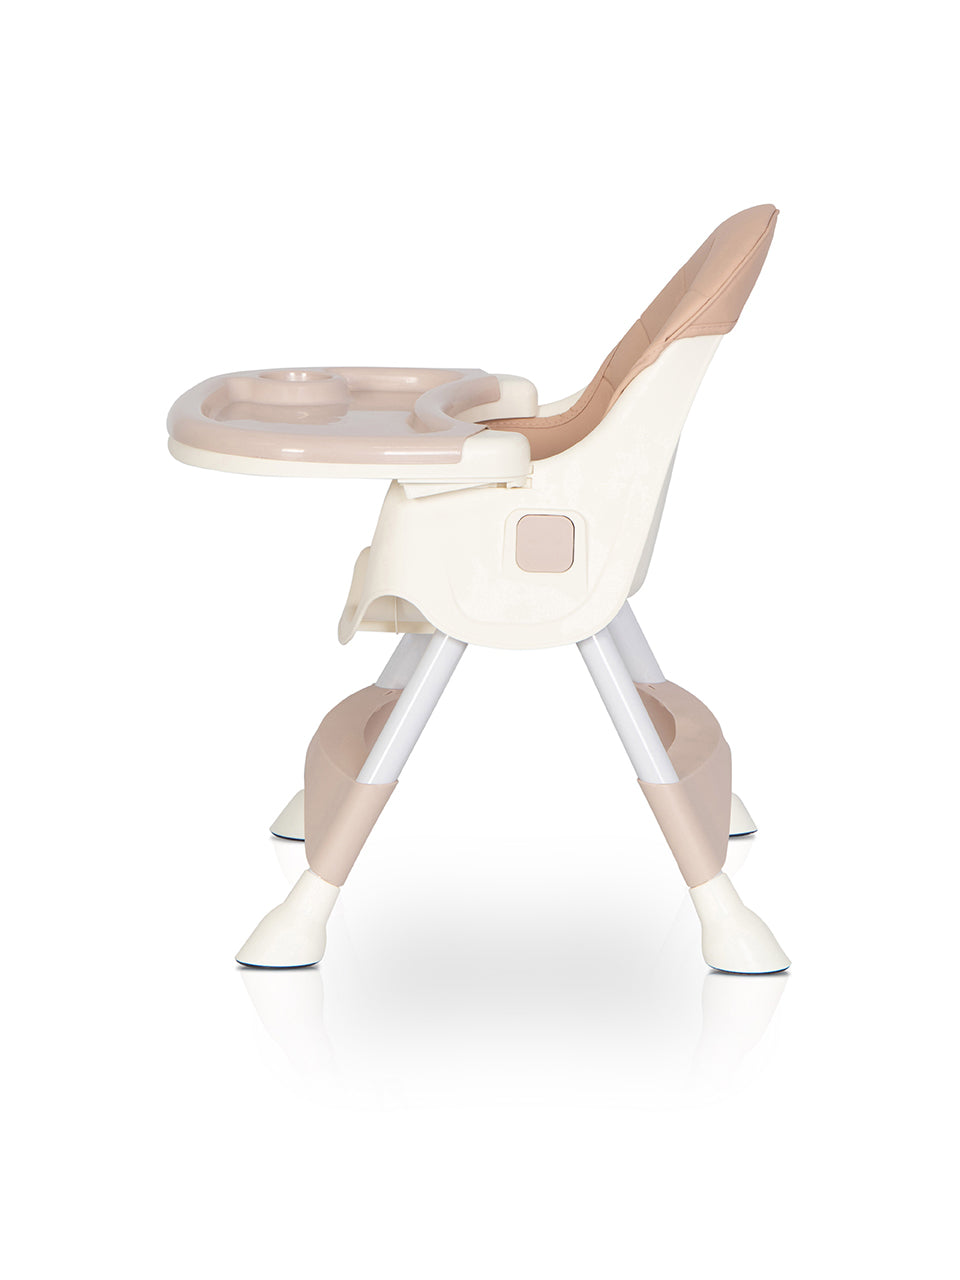 High chair 4in1; foldable high chair; high chair for infants and toddlers